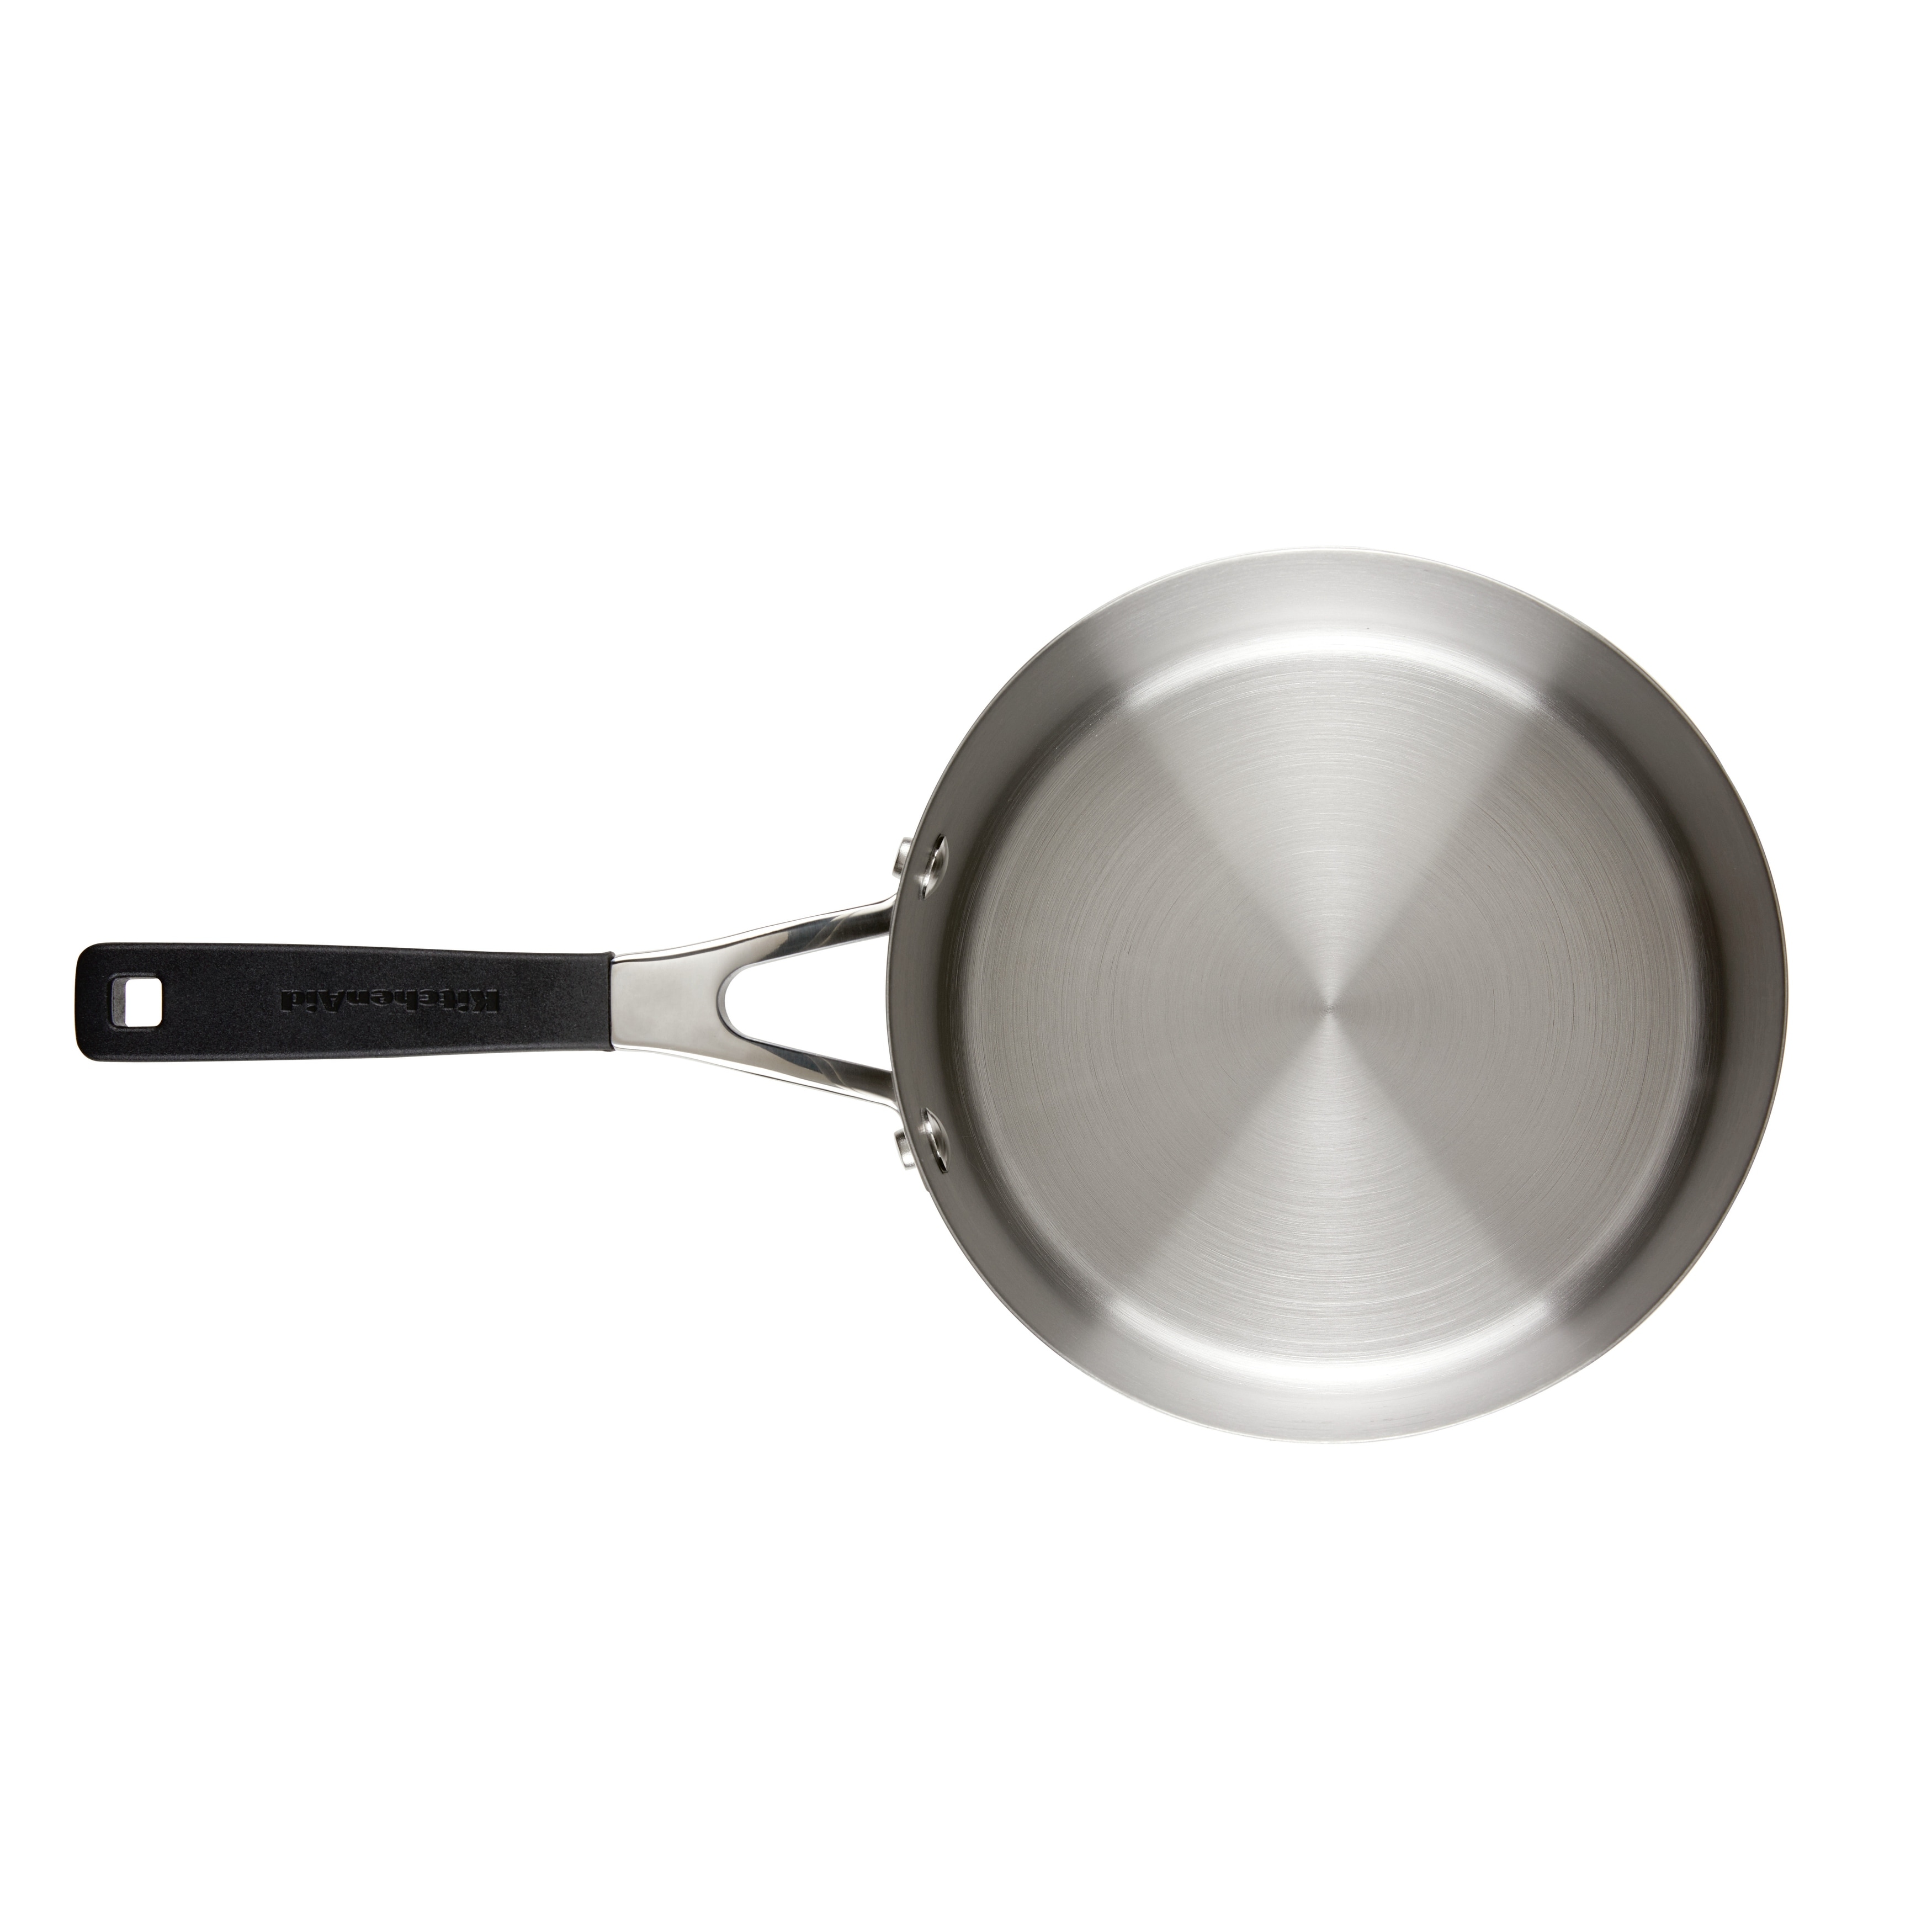 KitchenAid Stainless Steel Induction Saucepan with Lid, 3-Quart, Brushed  Stainless Steel - Bed Bath & Beyond - 38077592